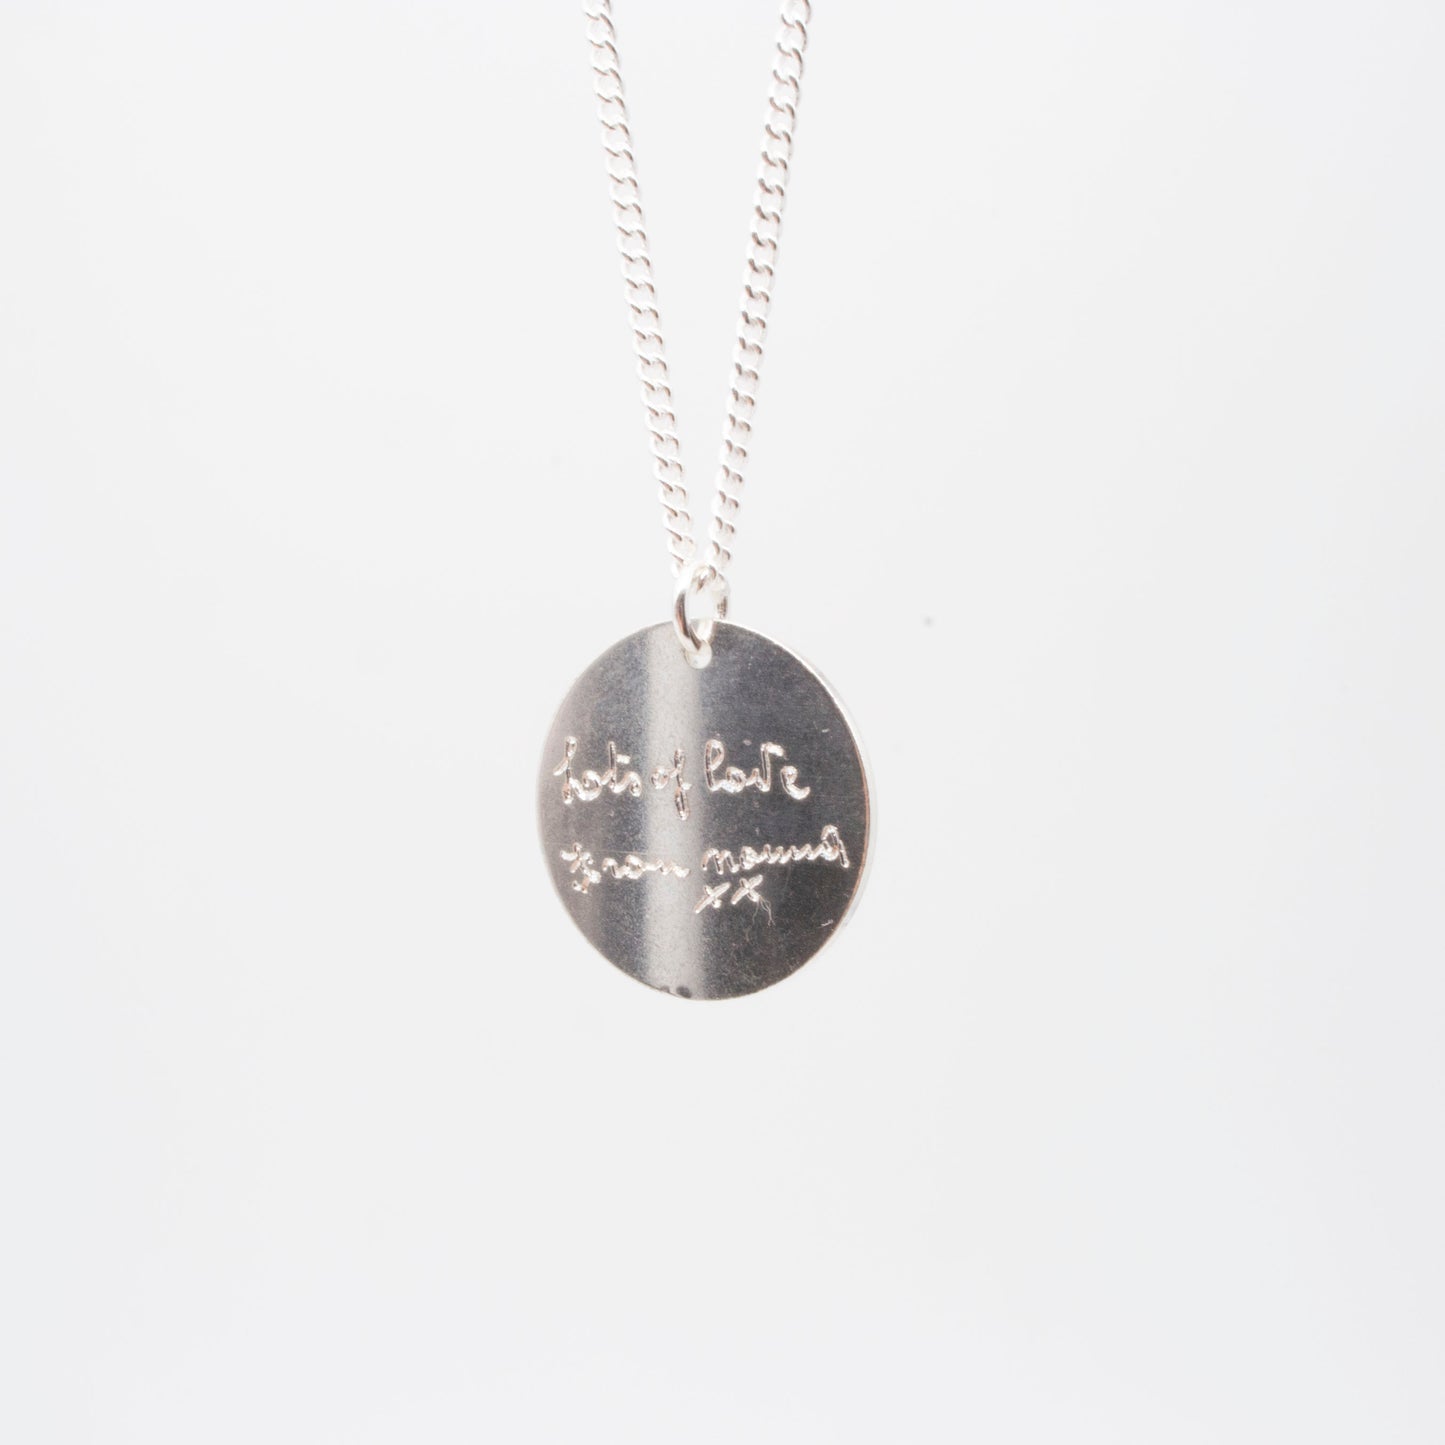 Handwriting pendant necklace in sterling silver - round